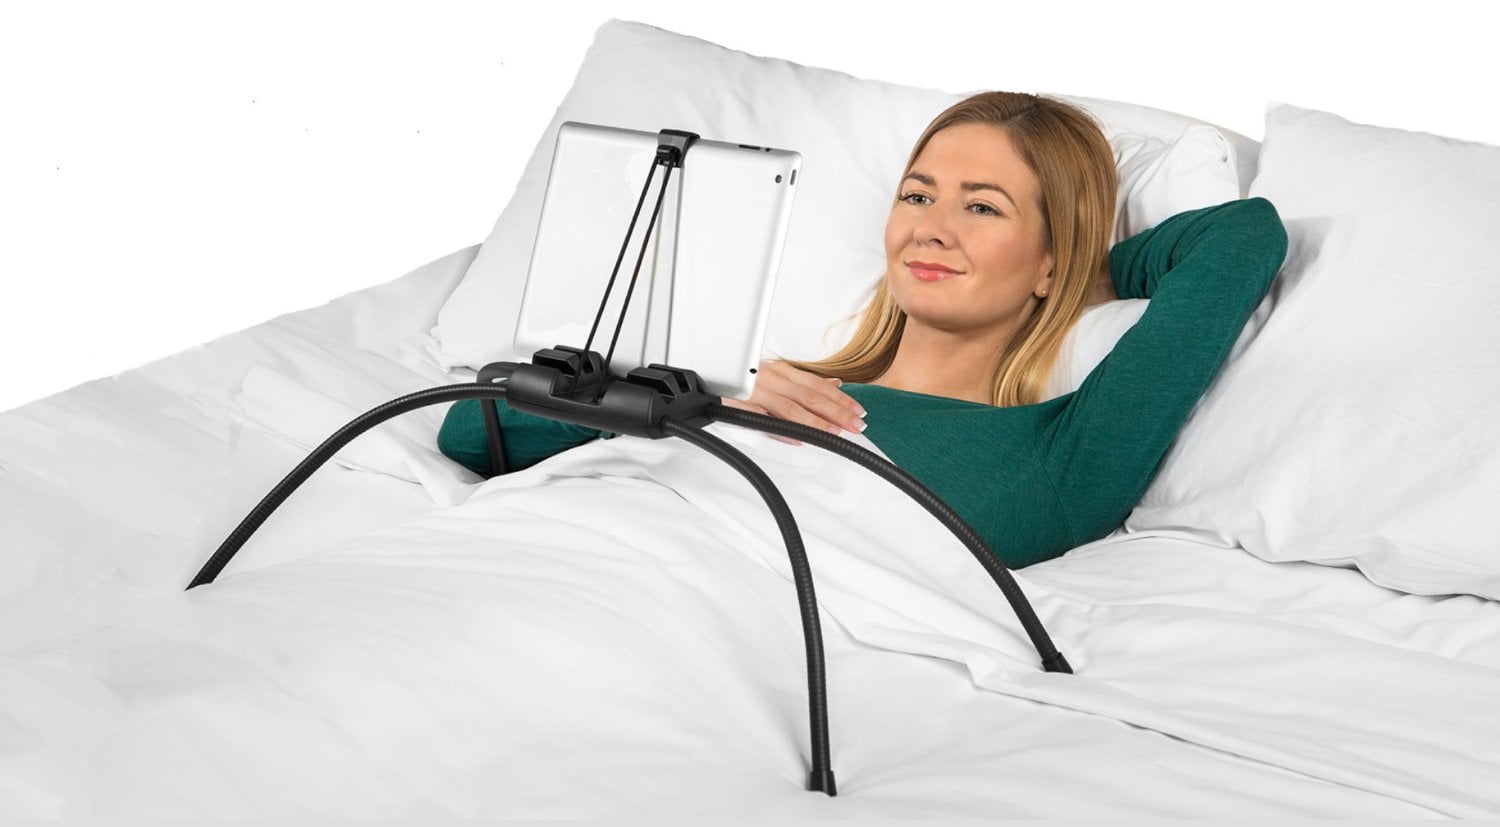 Sofa nbryte Tablift Tablet Stand for The Bed or Any Uneven Surface TABLIFT2.0